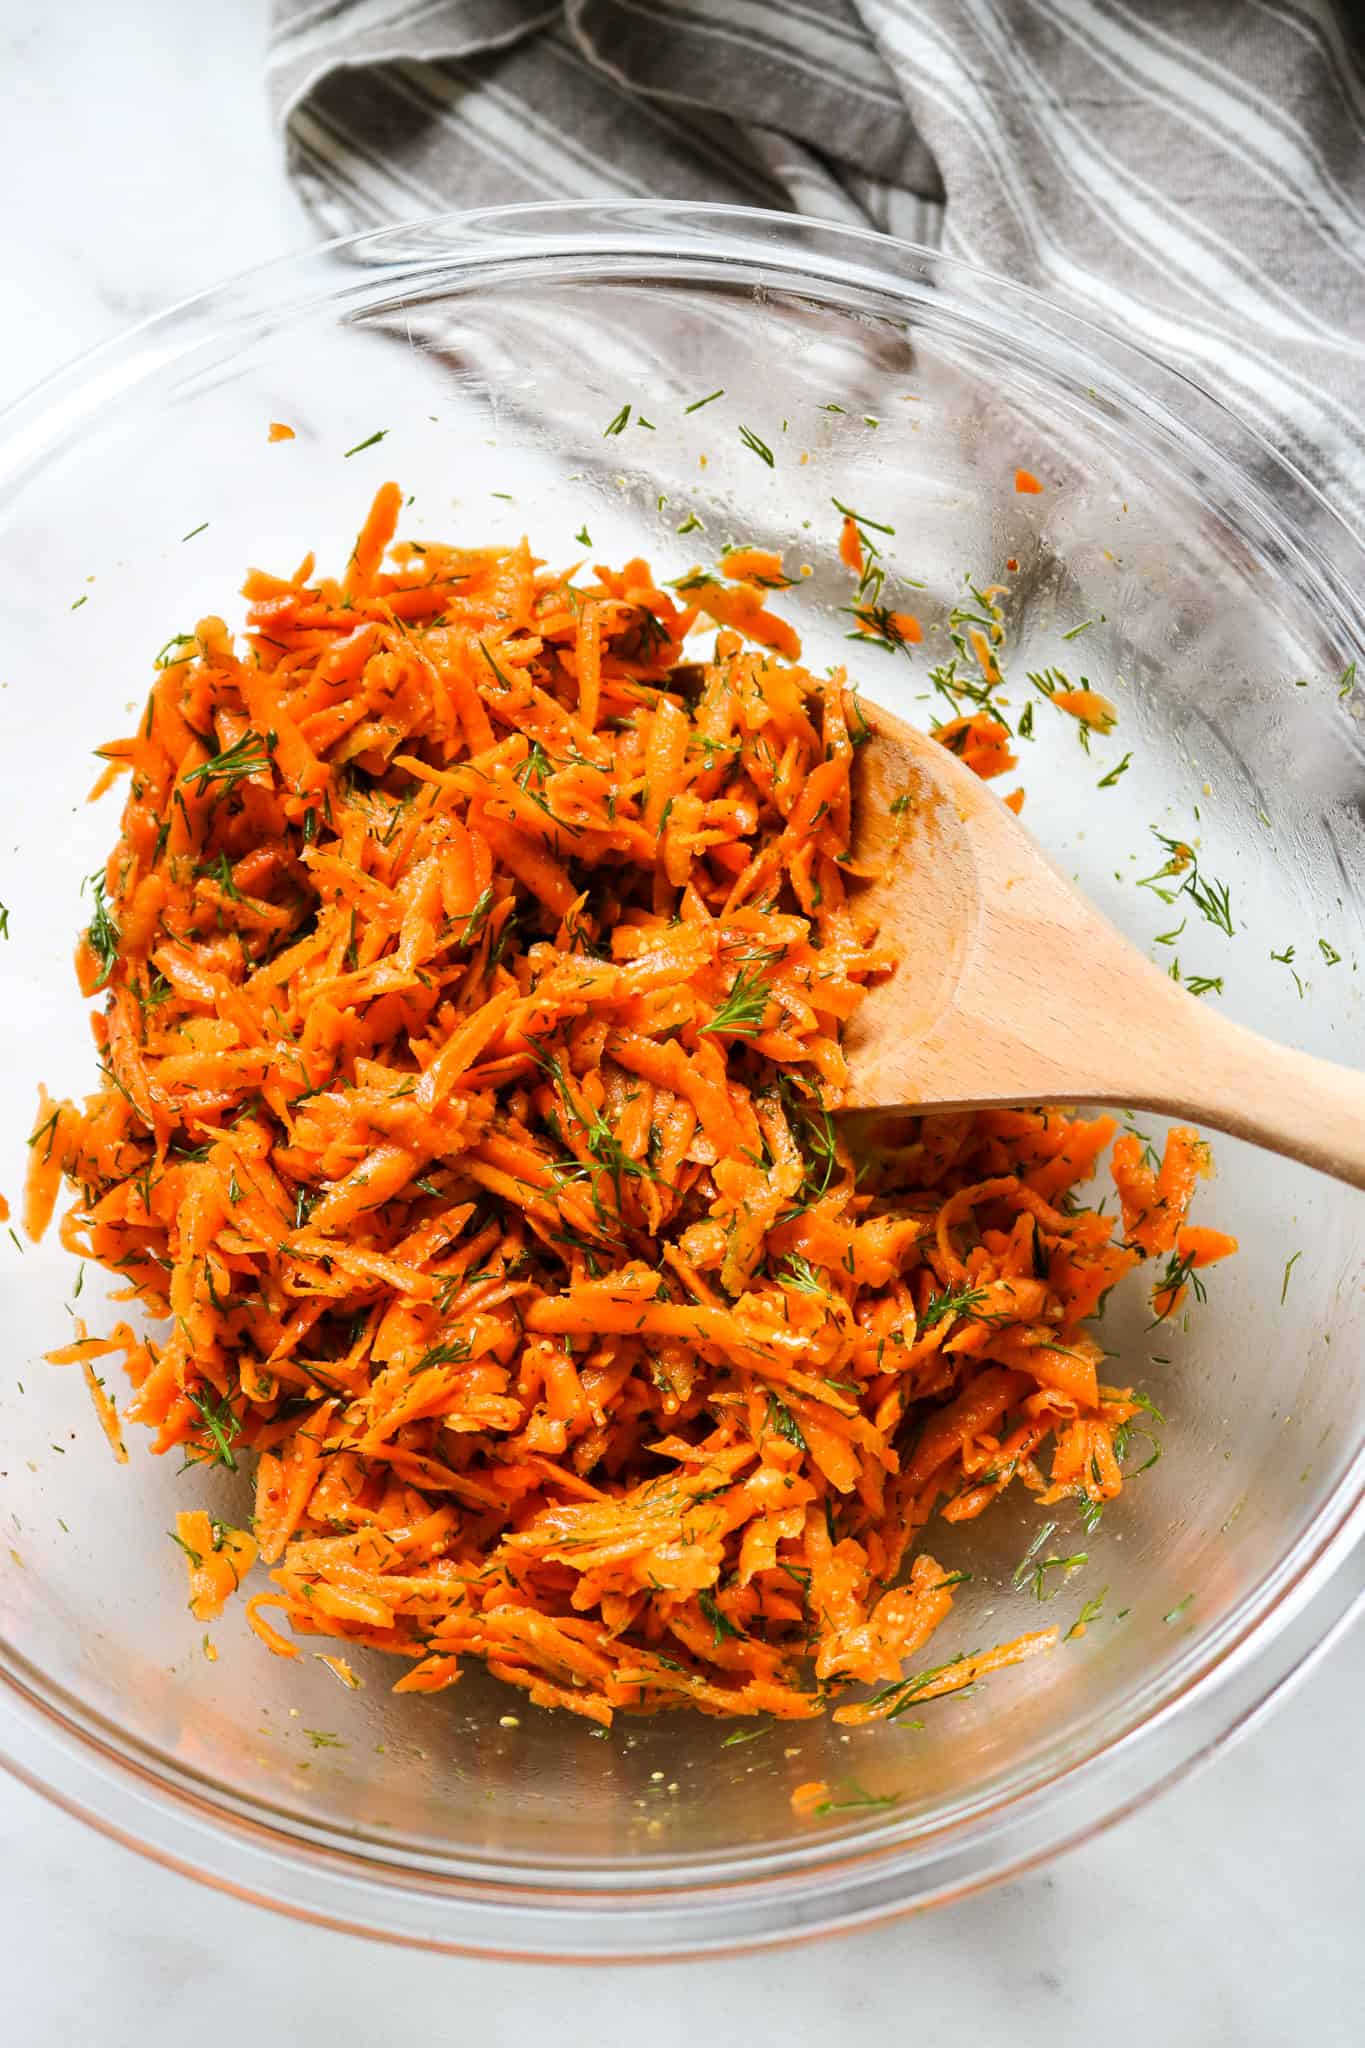 shredded carrot salad with fresh dill in a glass bowl with a wooden spoon